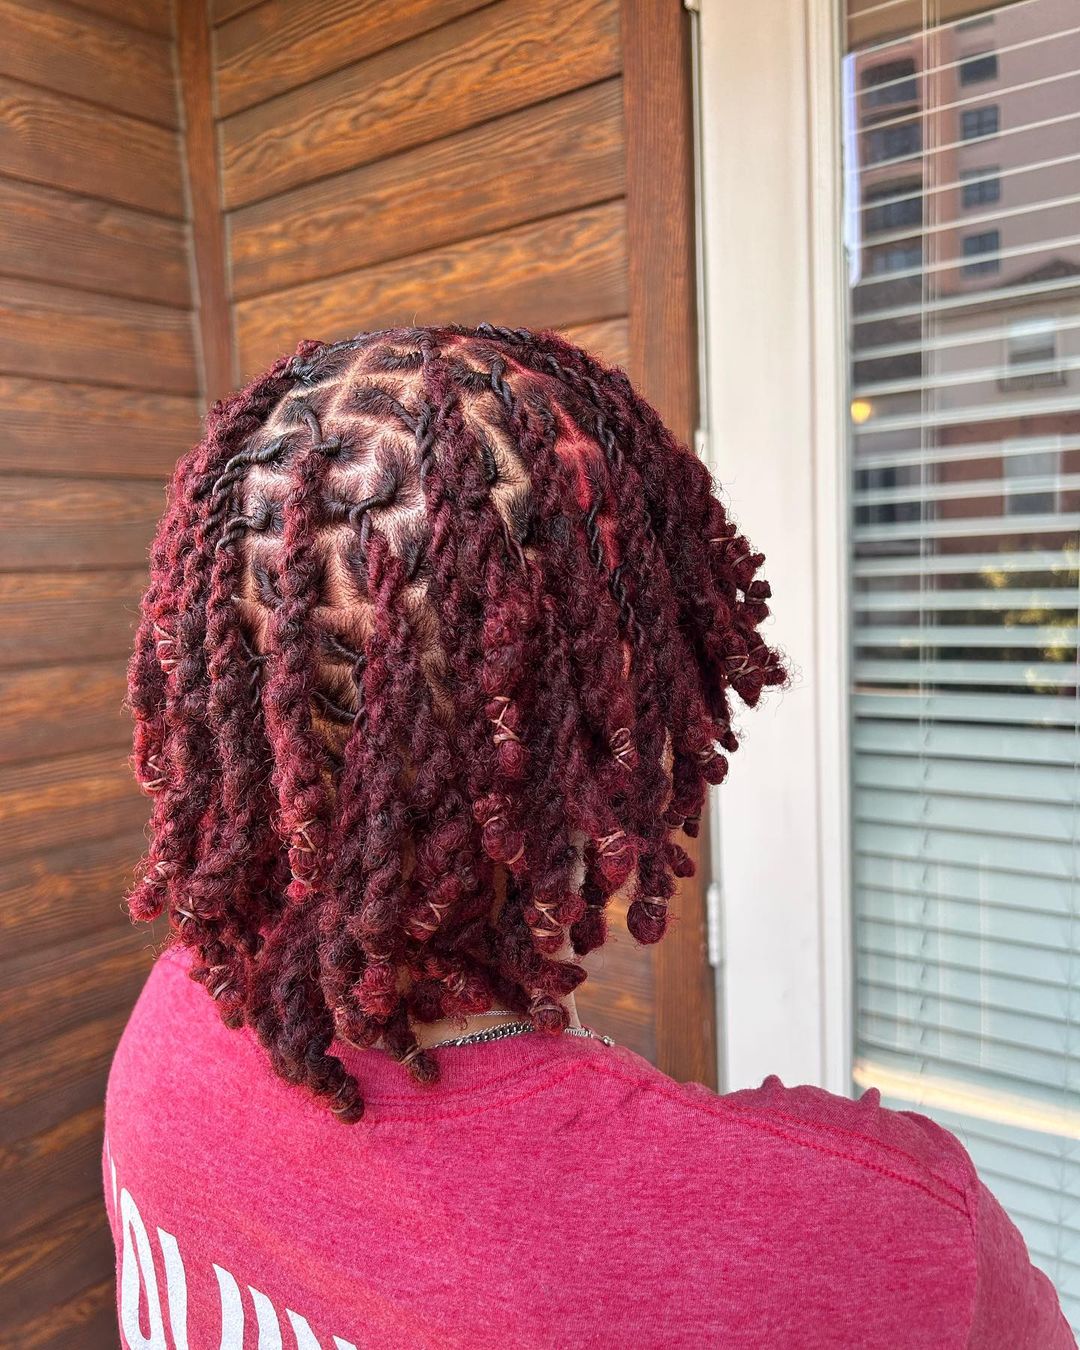 18. Burgundy Colored Wavy Rope Twists